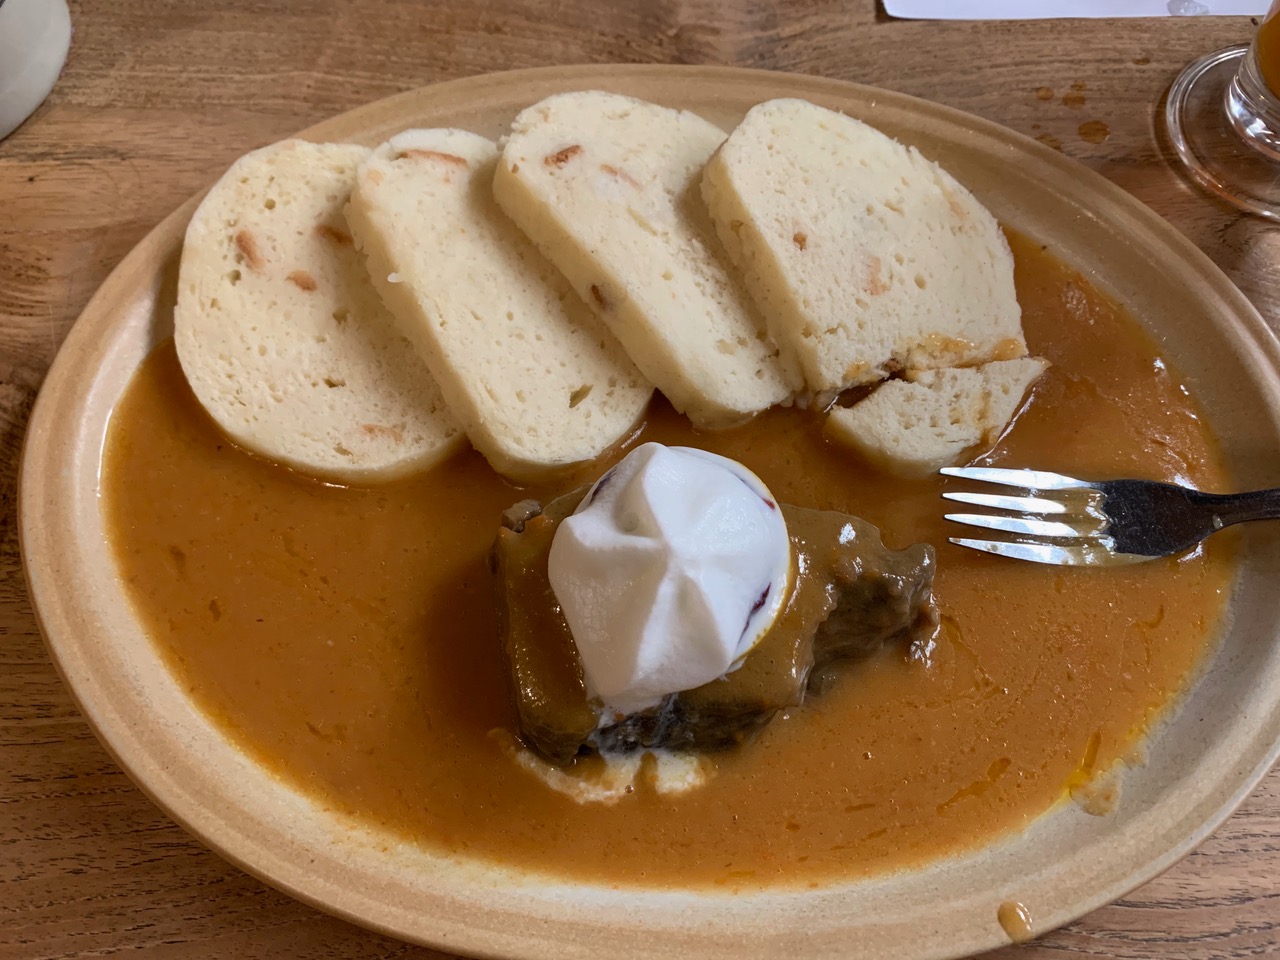 Beef chunks with a vegetable cream sauce and bread dumplings